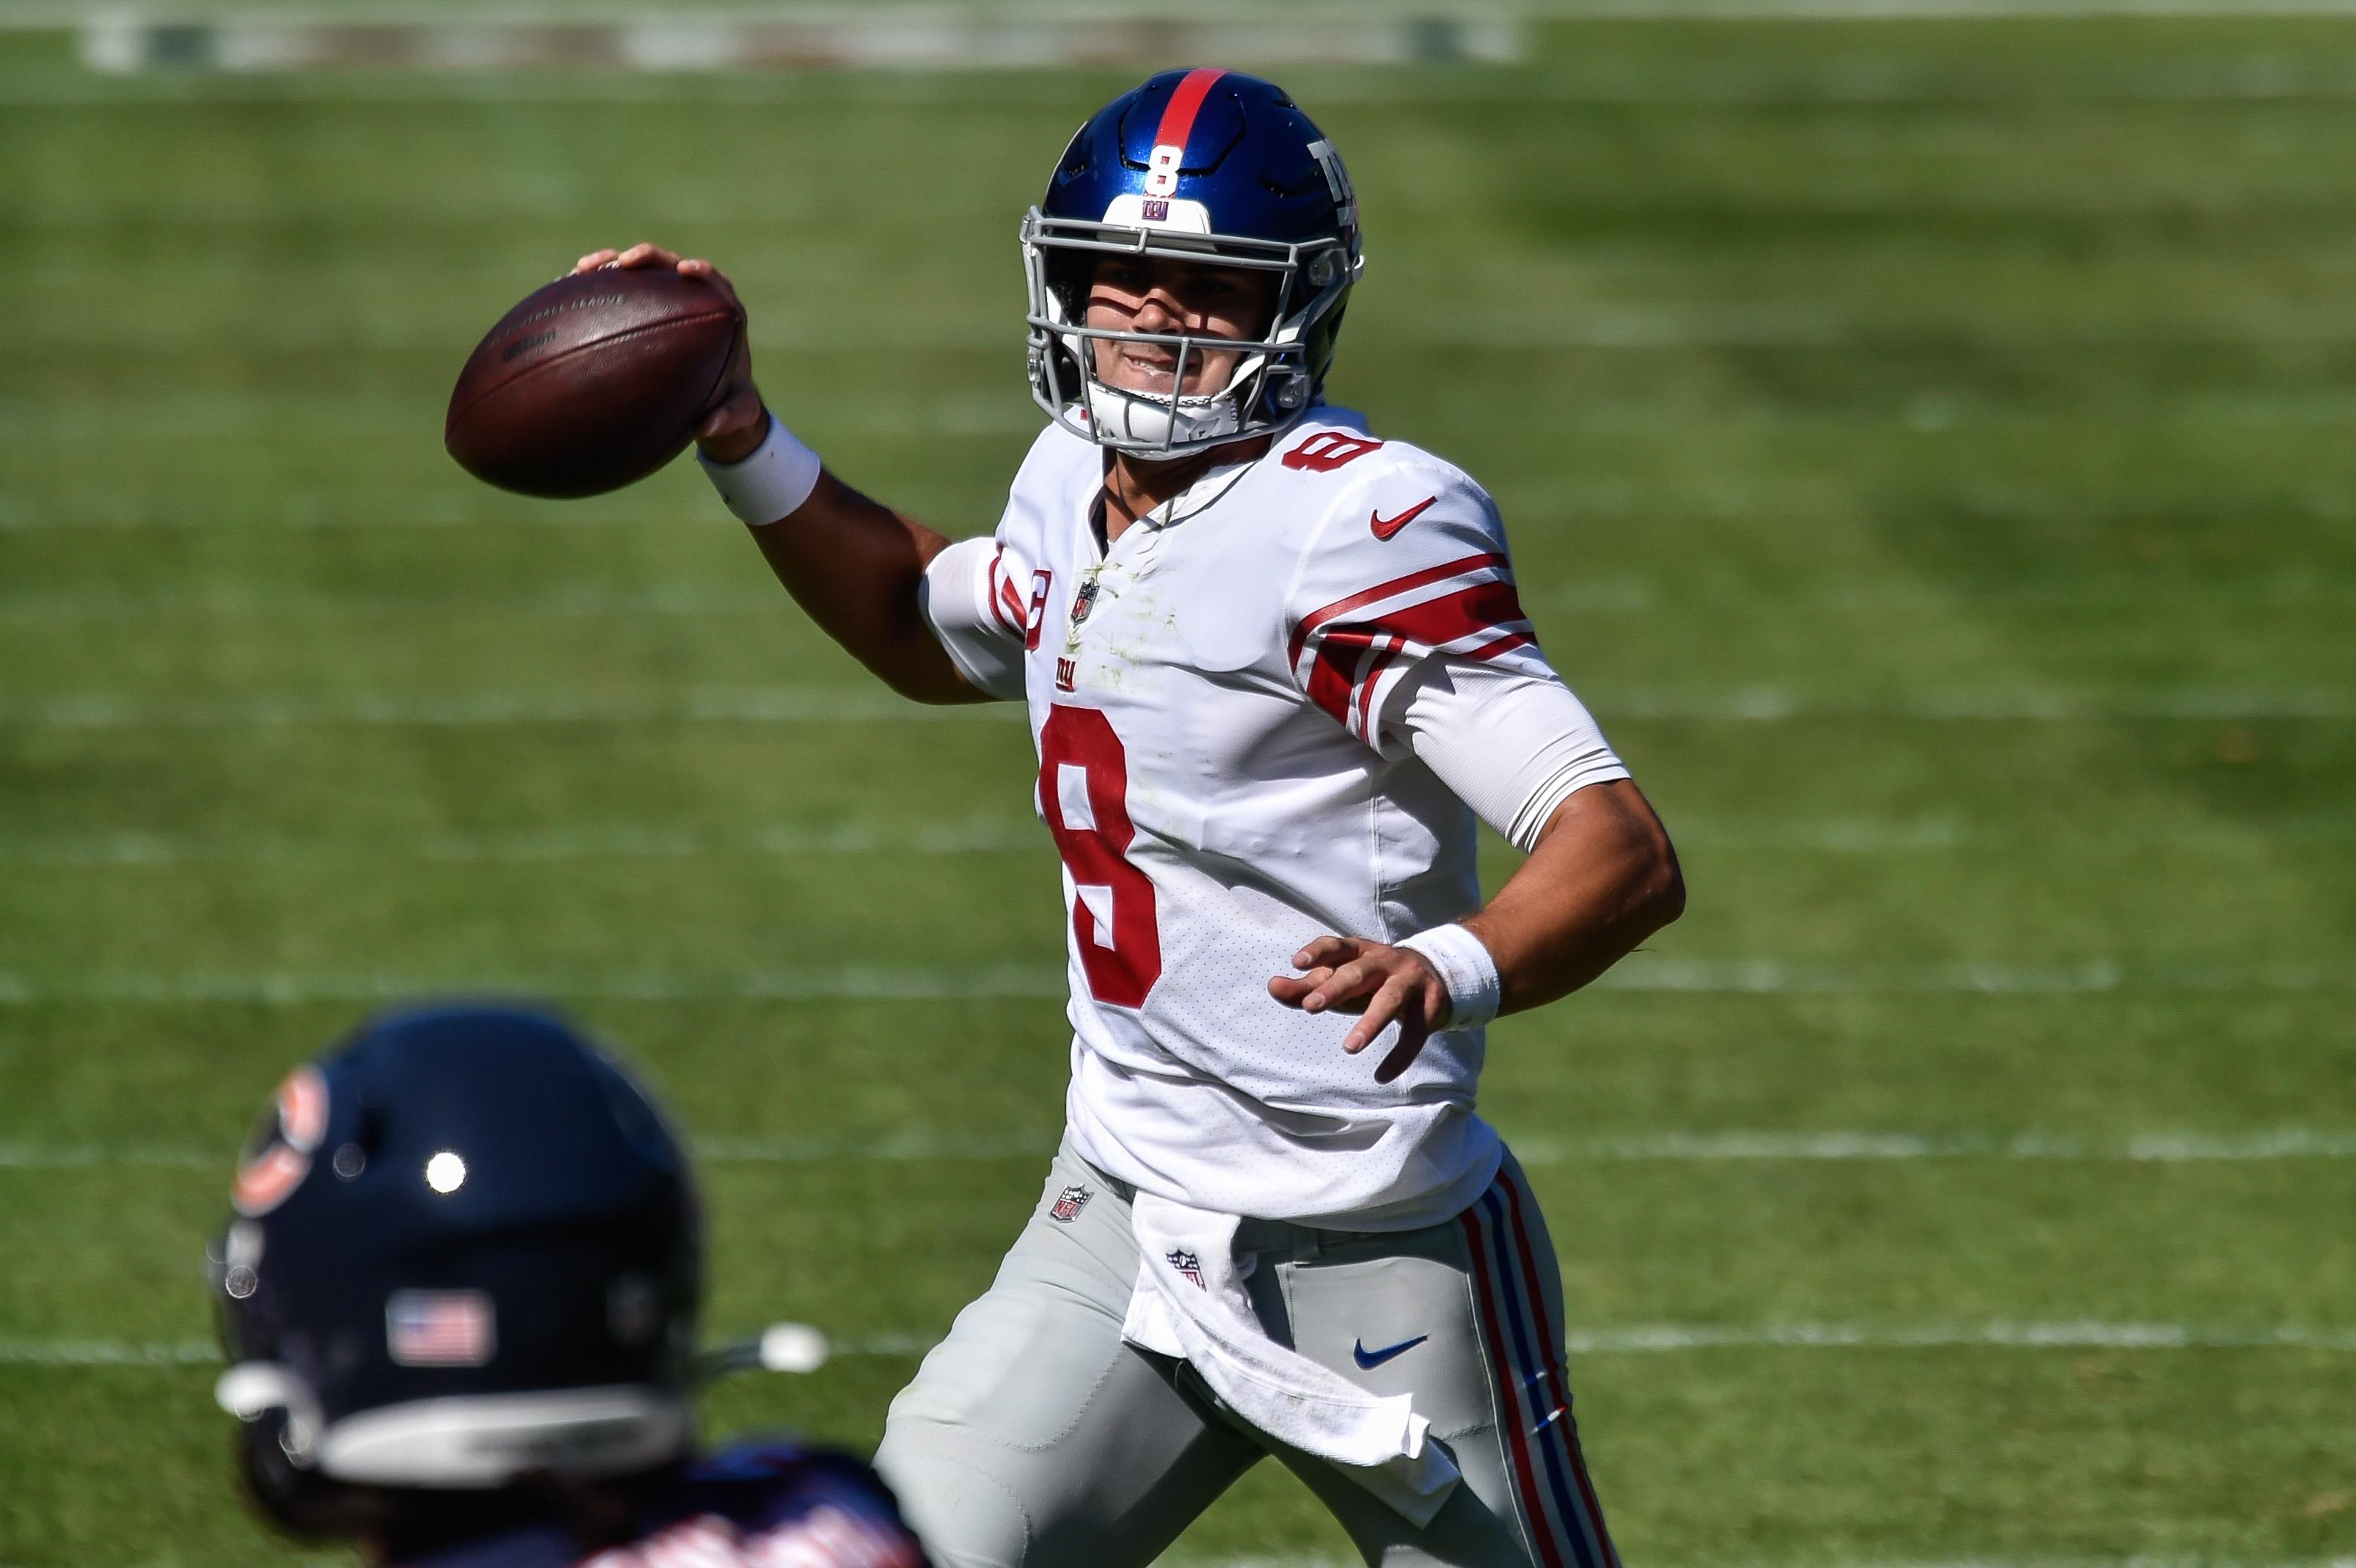 Sep 20, 2020; Chicago, Illinois, USA; New York Giants quarterback Daniel Jones (8) looks to pass during the fourth quarter against the Chicago Bears at Soldier Field. Mandatory Credit: Jeffrey Becker-USA TODAY Sports / © Jeffrey Becker-USA TODAY Sports